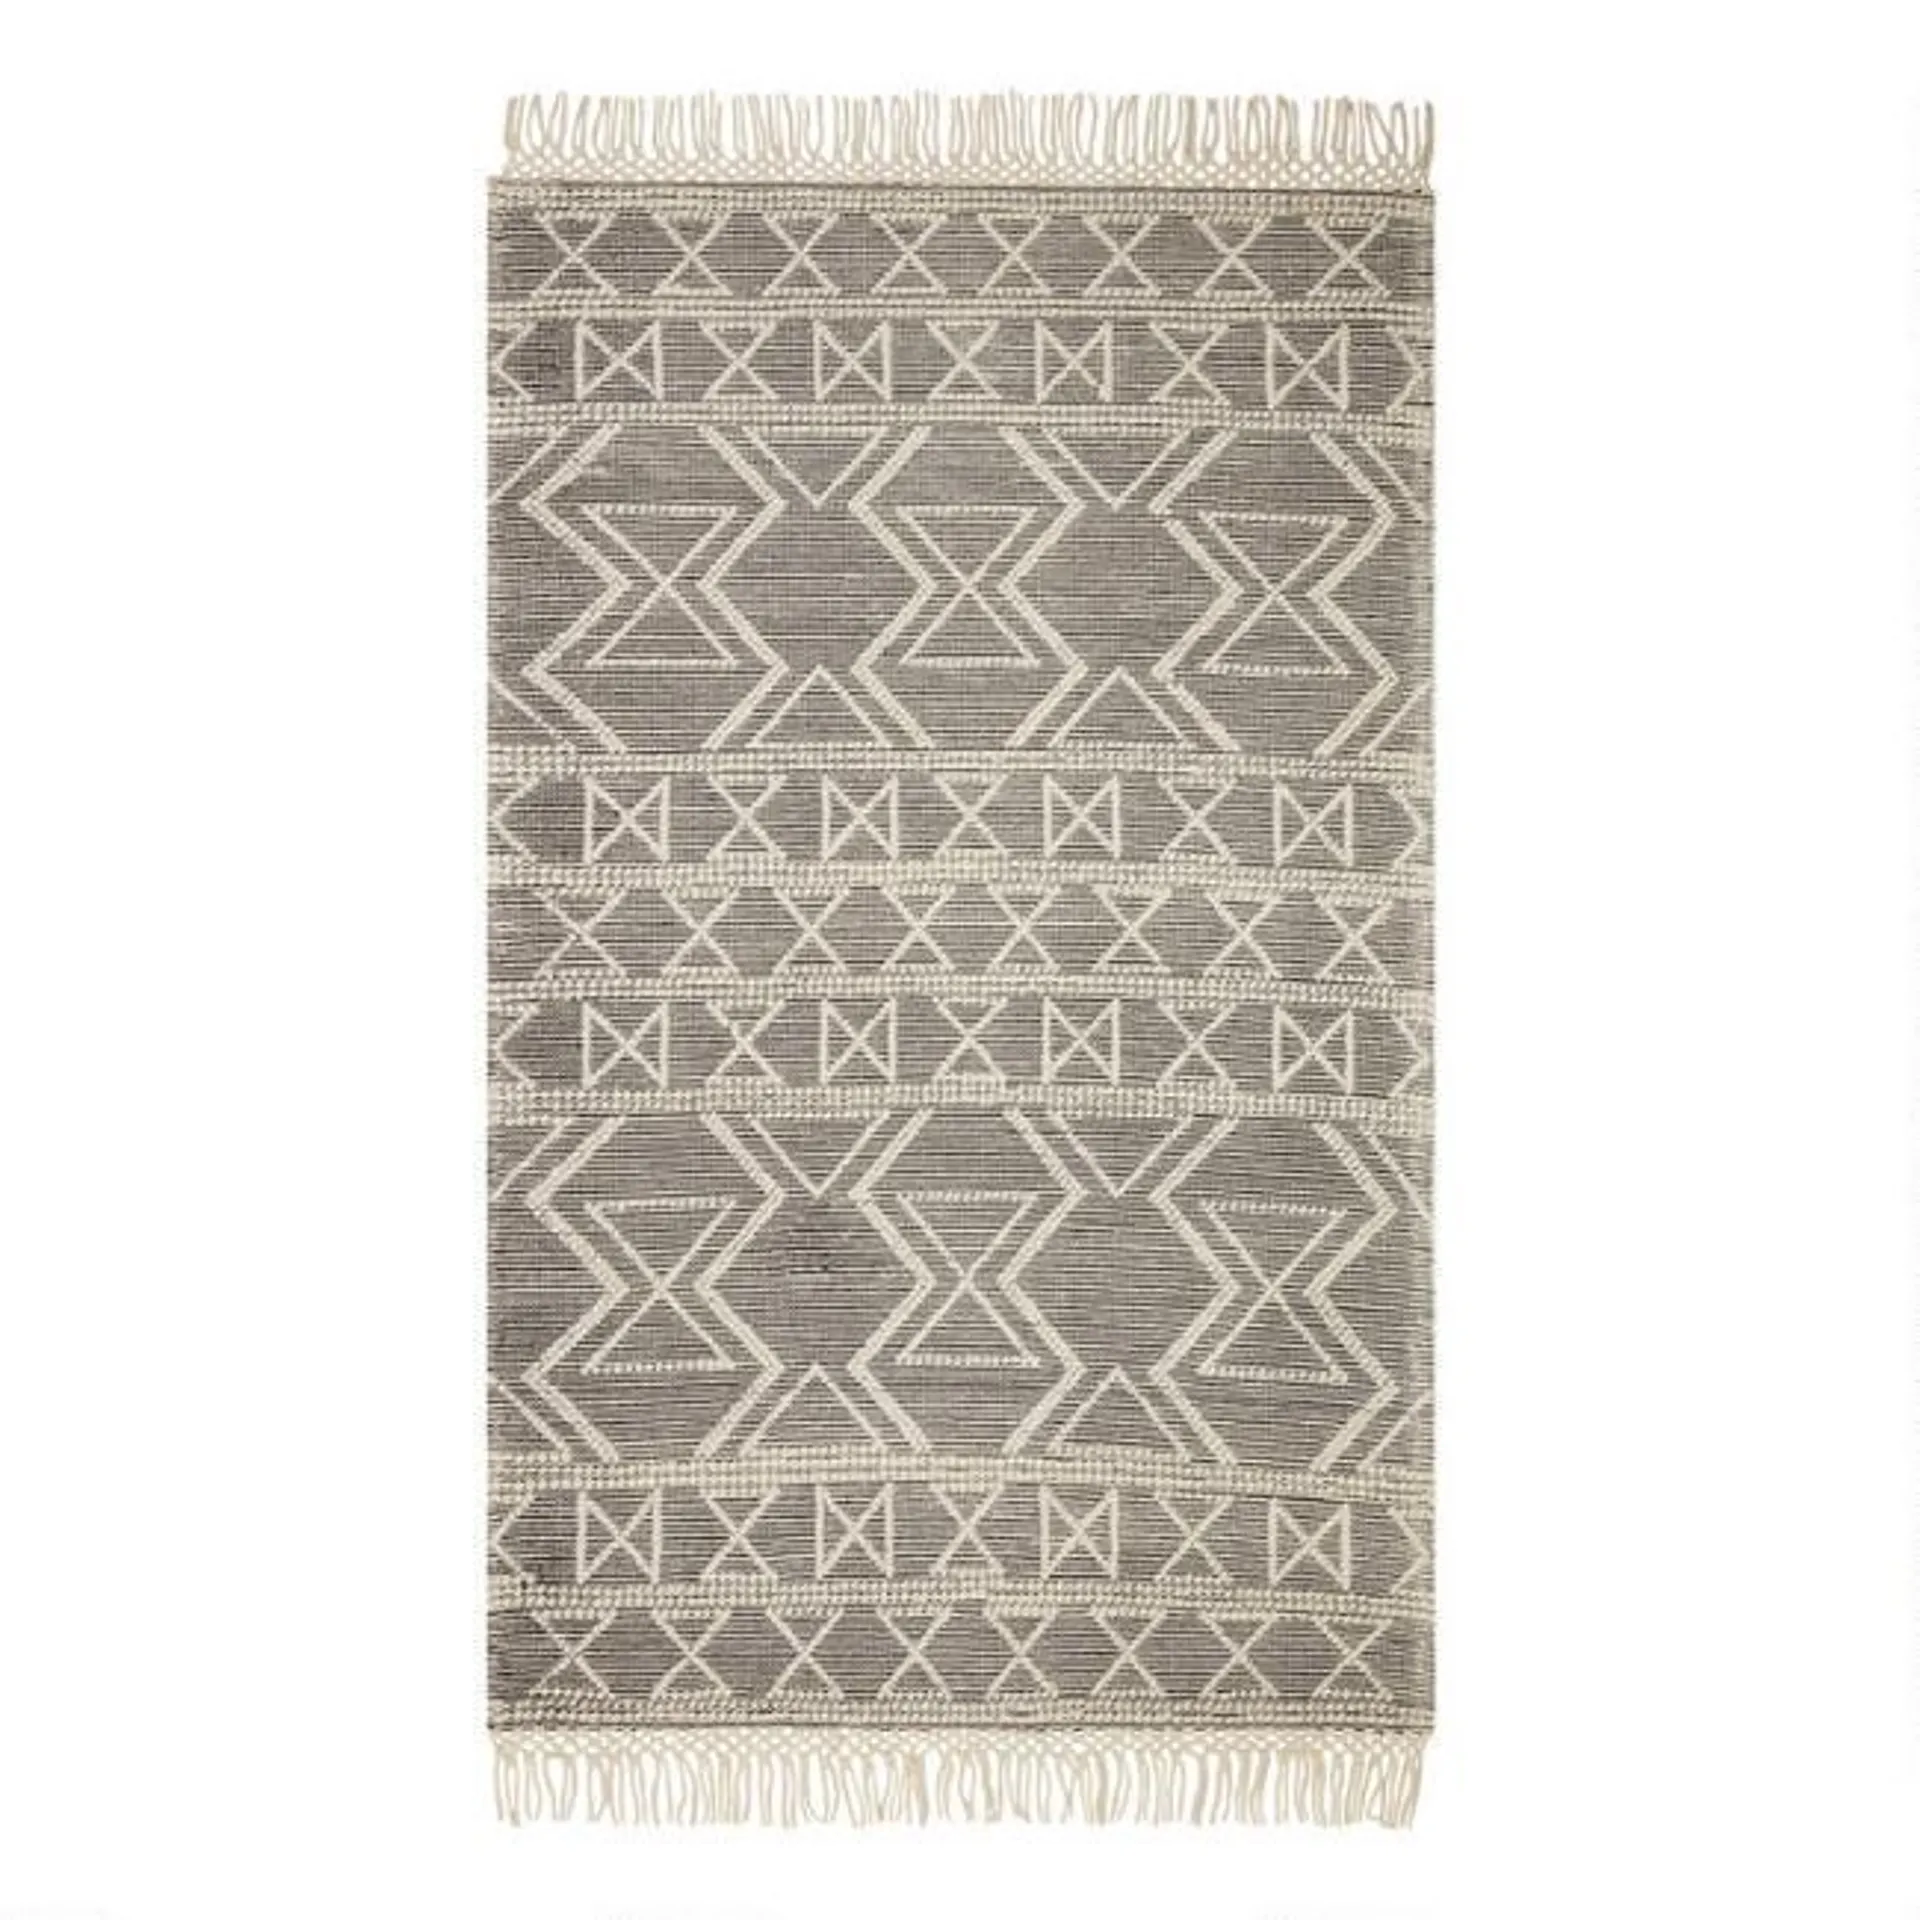 Black and Ivory Moroccan Style Sweater Wool Barret Area Rug